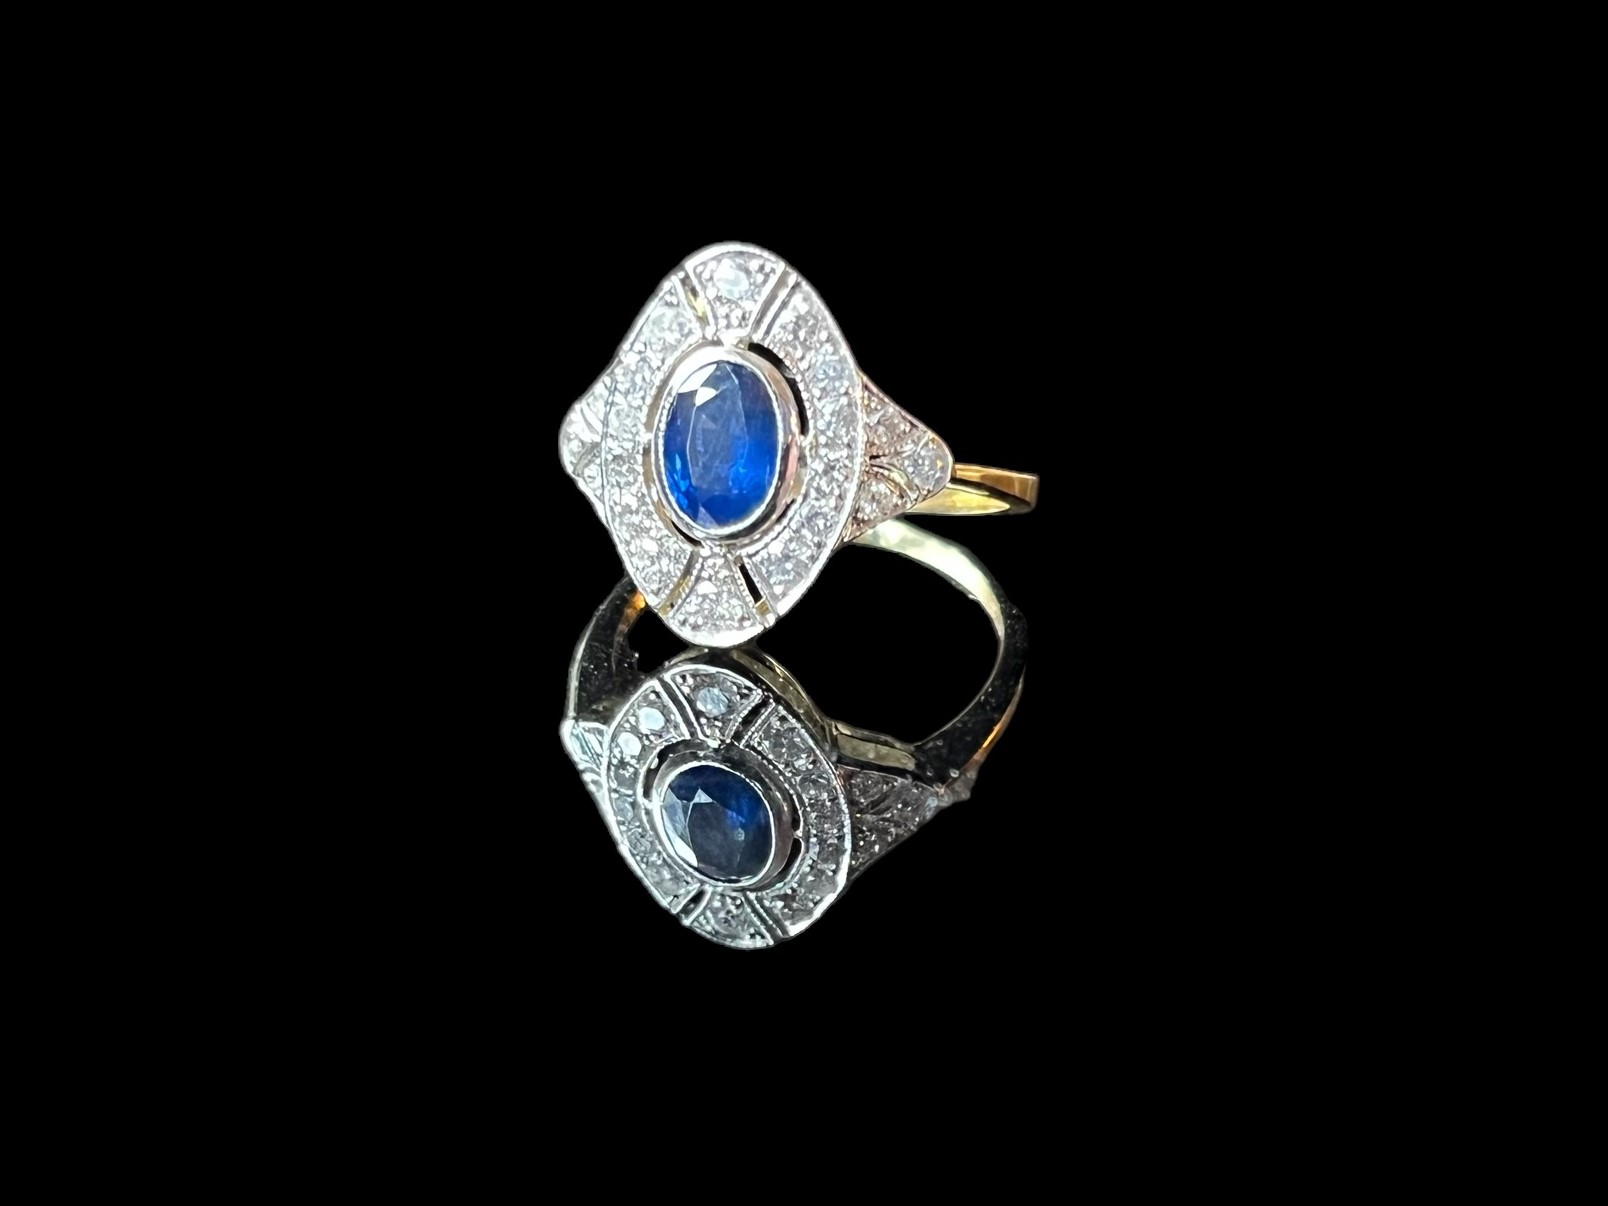 Sapphire and diamond ring set in 18ct gold - Image 2 of 2